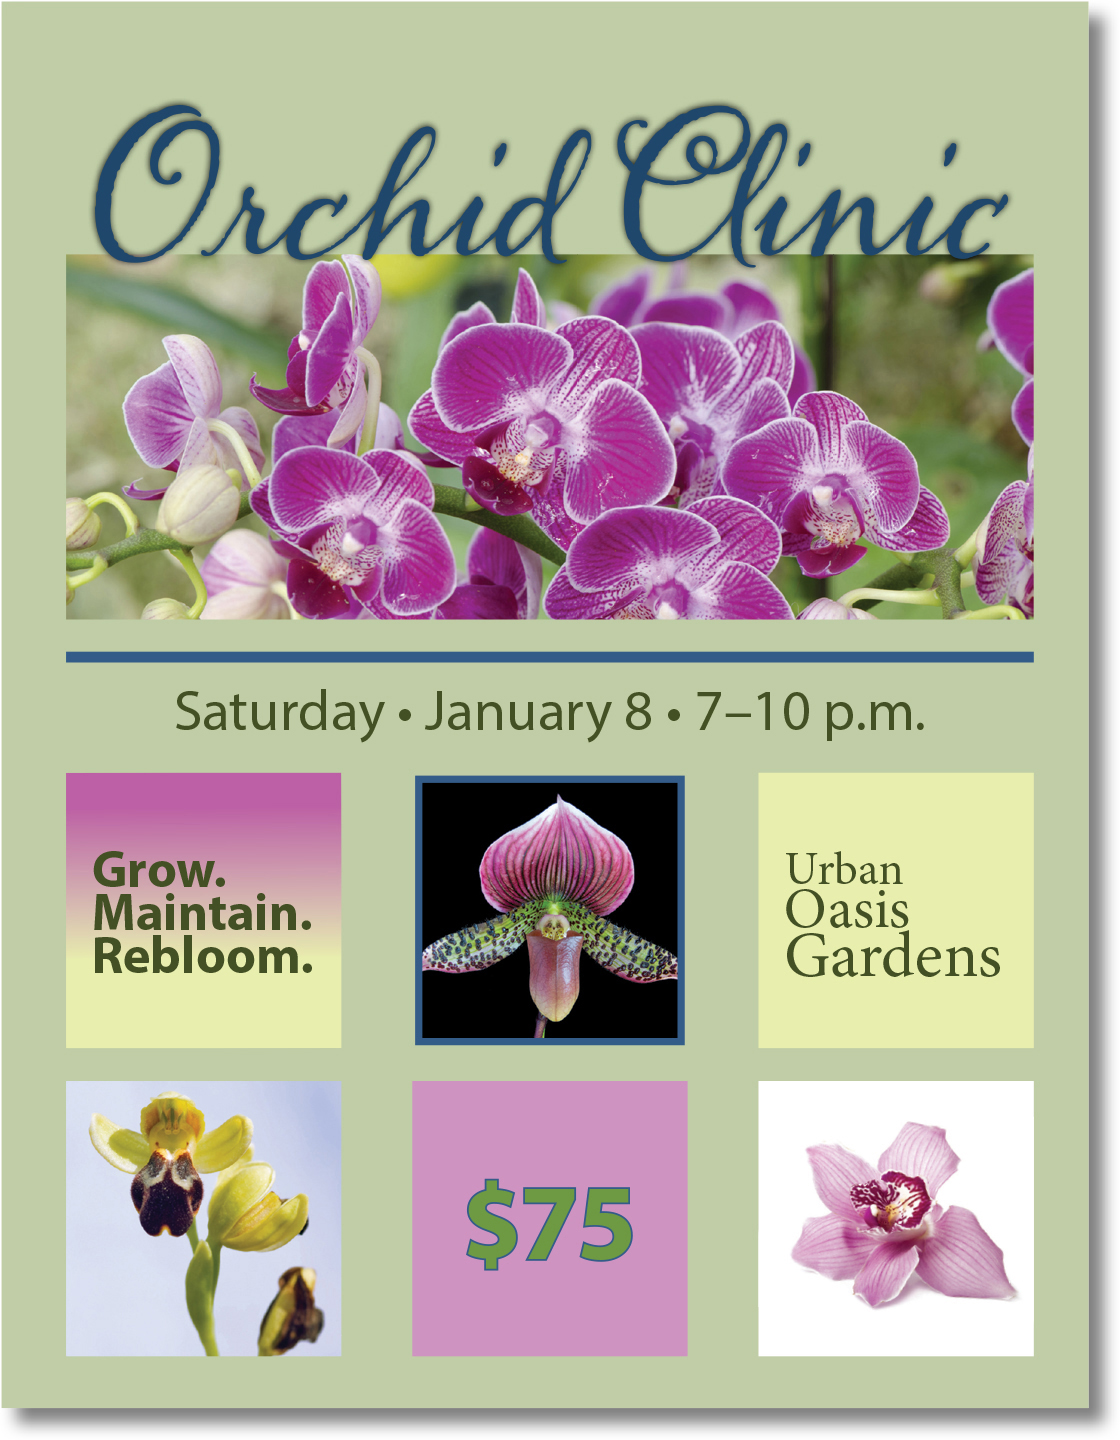 A figure shows a page with heading Orchid Clinic.